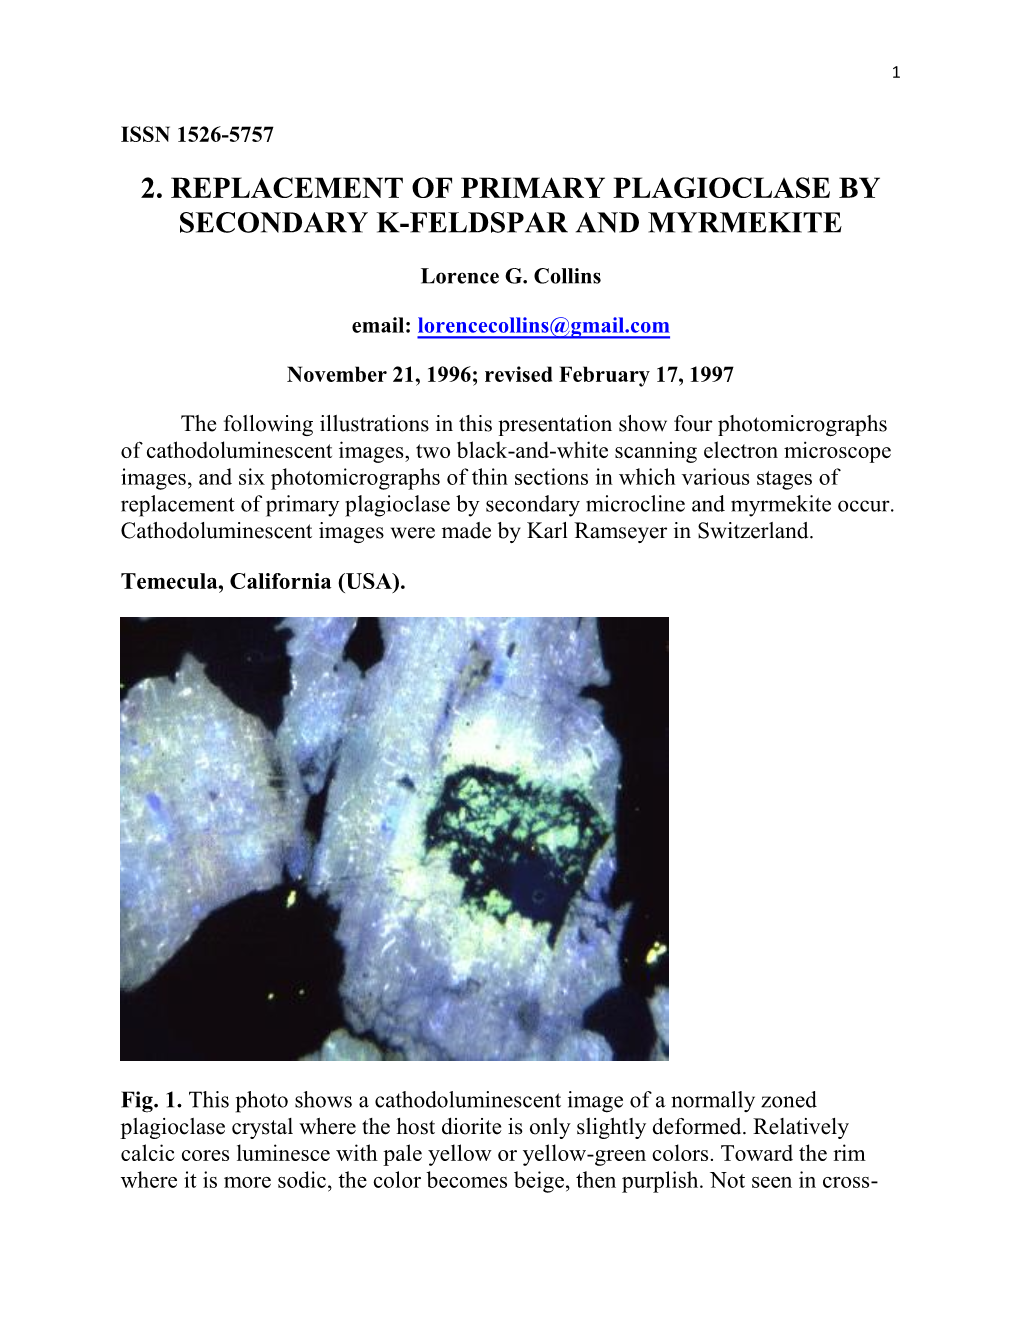 2. Replacement of Primary Plagioclase by Secondary K-Feldspar and Myrmekite